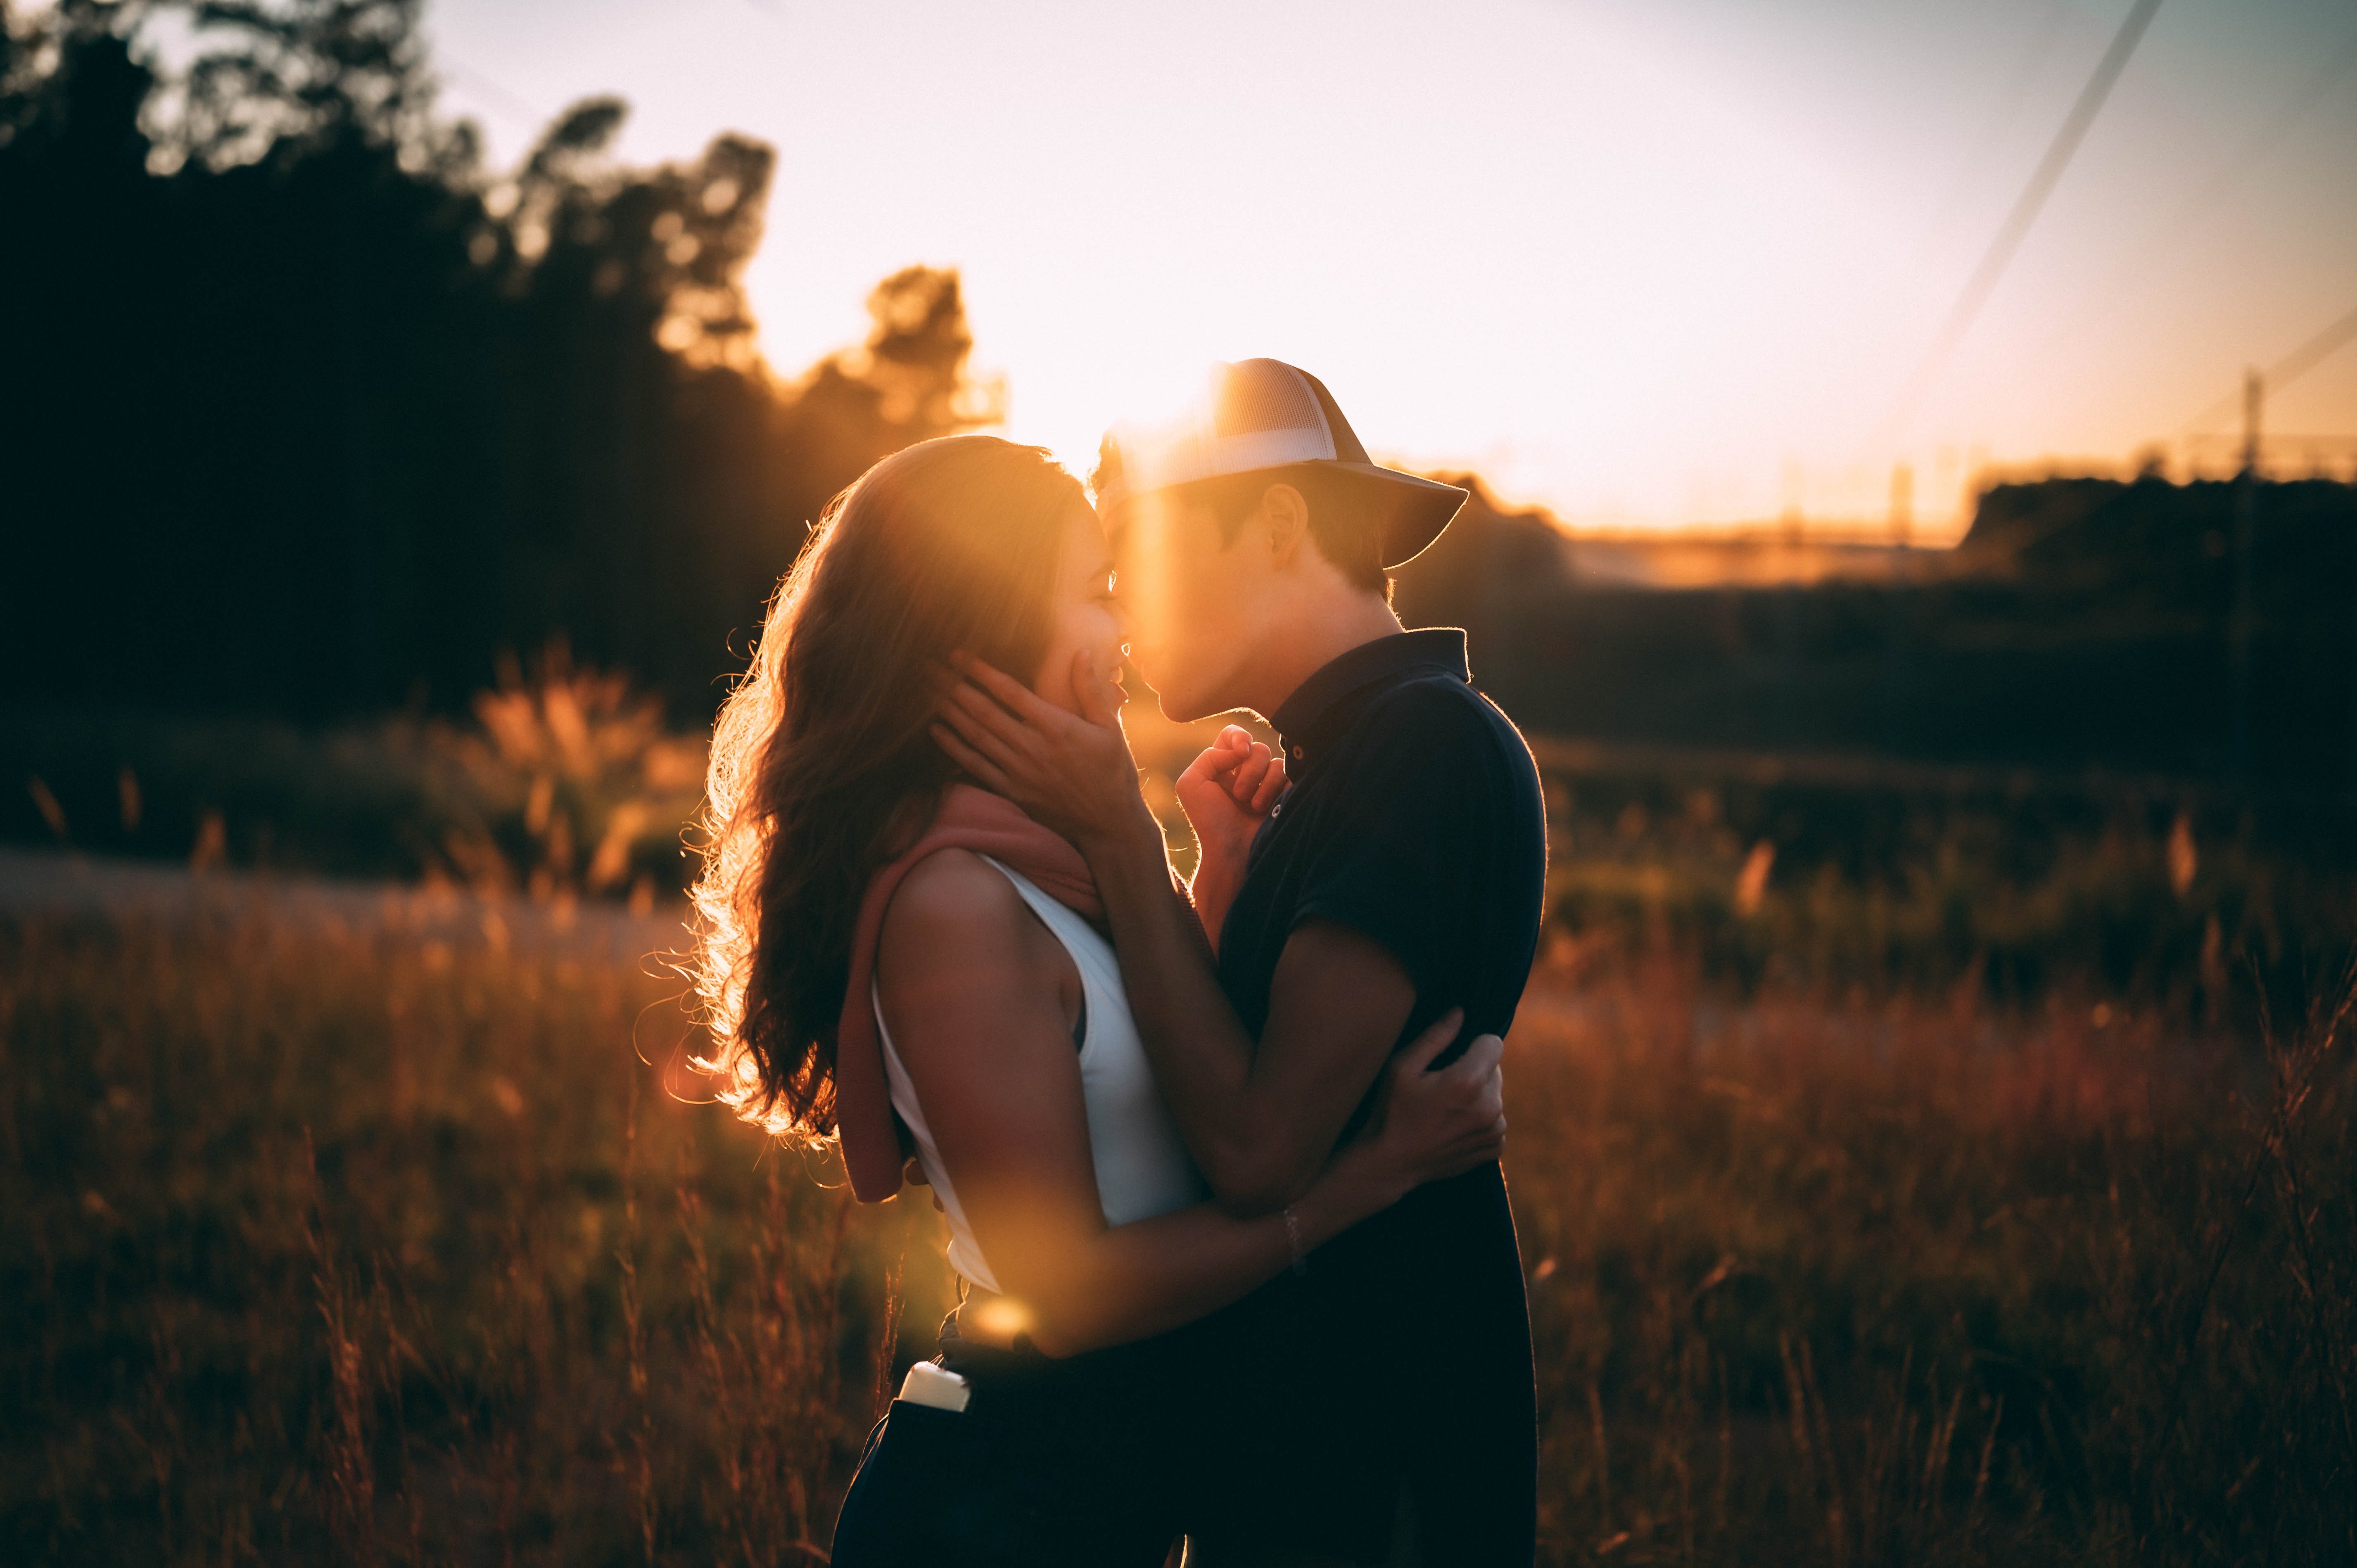 Jake and Kim fell in love in college. | Source: Unsplash